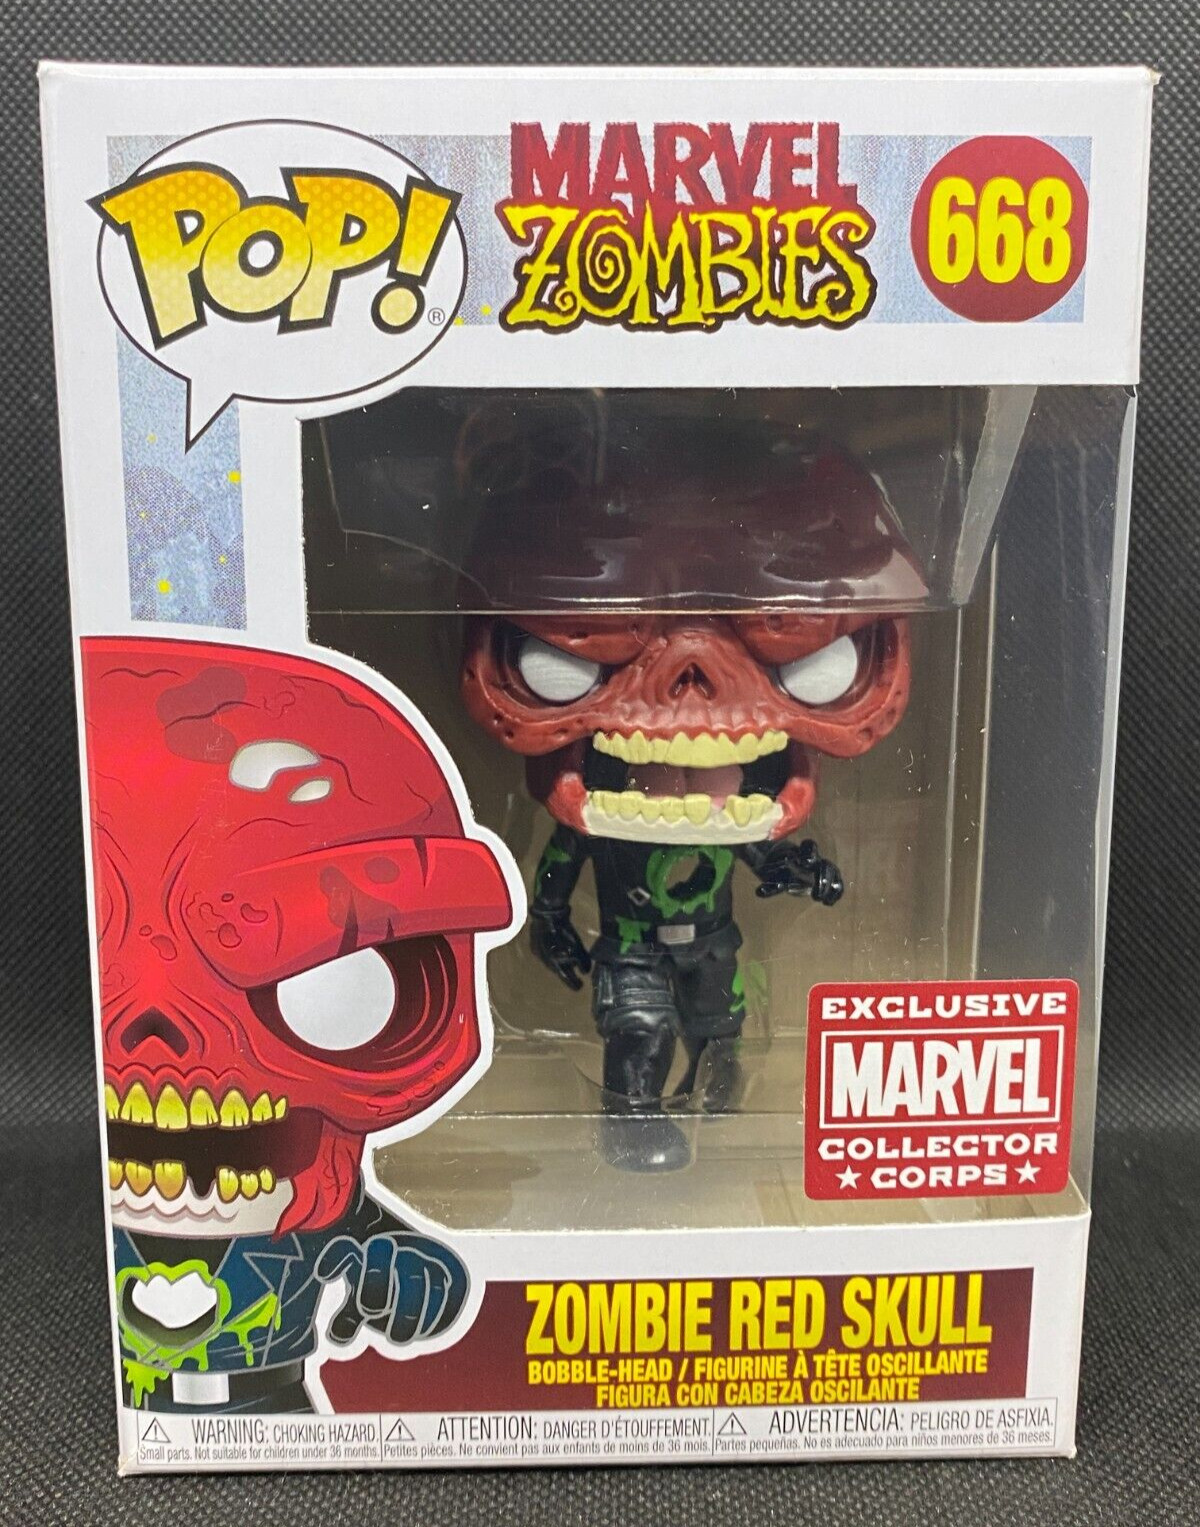 Funko Pop Zombie Red Skull 668 Marvel Zombies Collector Corps Exclusive Figure